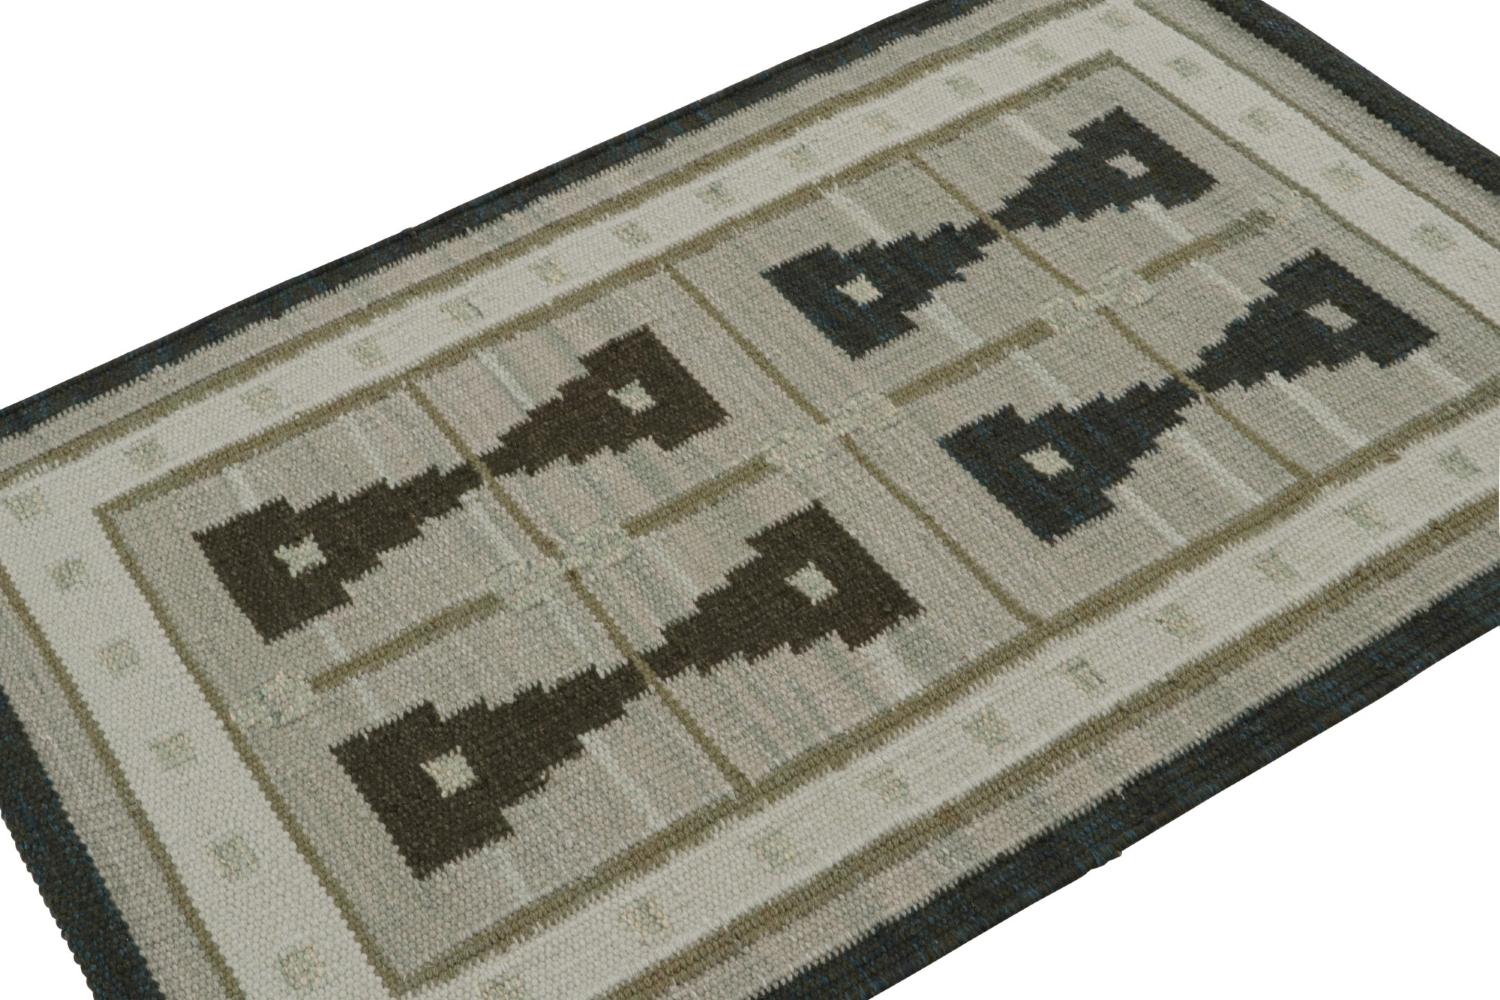 A smart 3x5 Swedish style kilim from our award-winning Scandinavian flat weave collection. Handwoven in wool, cotton & undyed natural yarns.

On the Design: 

This scatter rug enjoys geometric patterns in tones of grey, brown & black. Keen eyes will